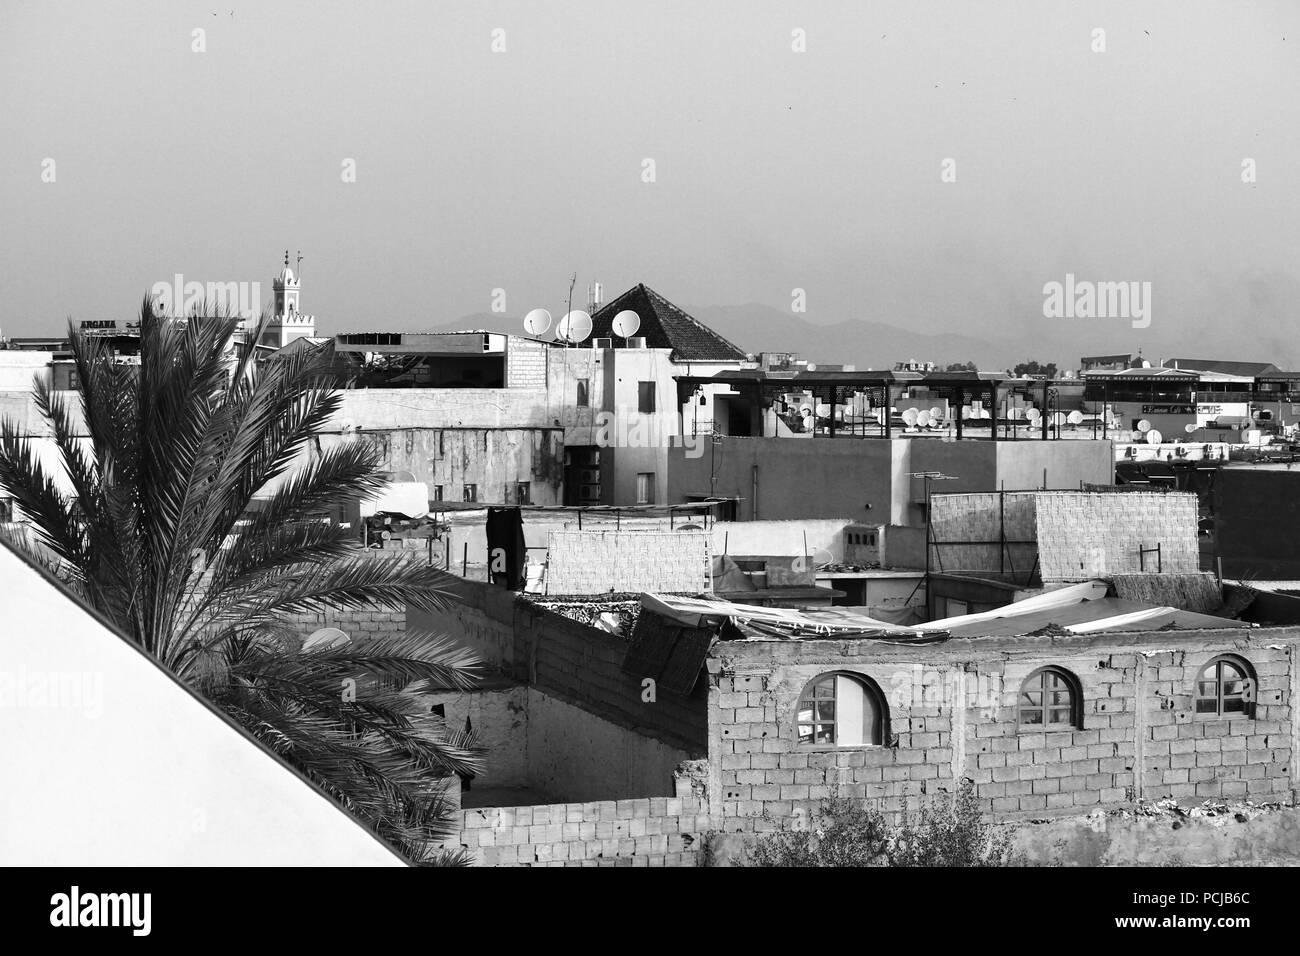 Marrakech Medina, roofs of old city, panorama, buildings, palm, mosque tower, view of the terraces. Black and white. Monochrome. Arabic city. Morocco. Stock Photo